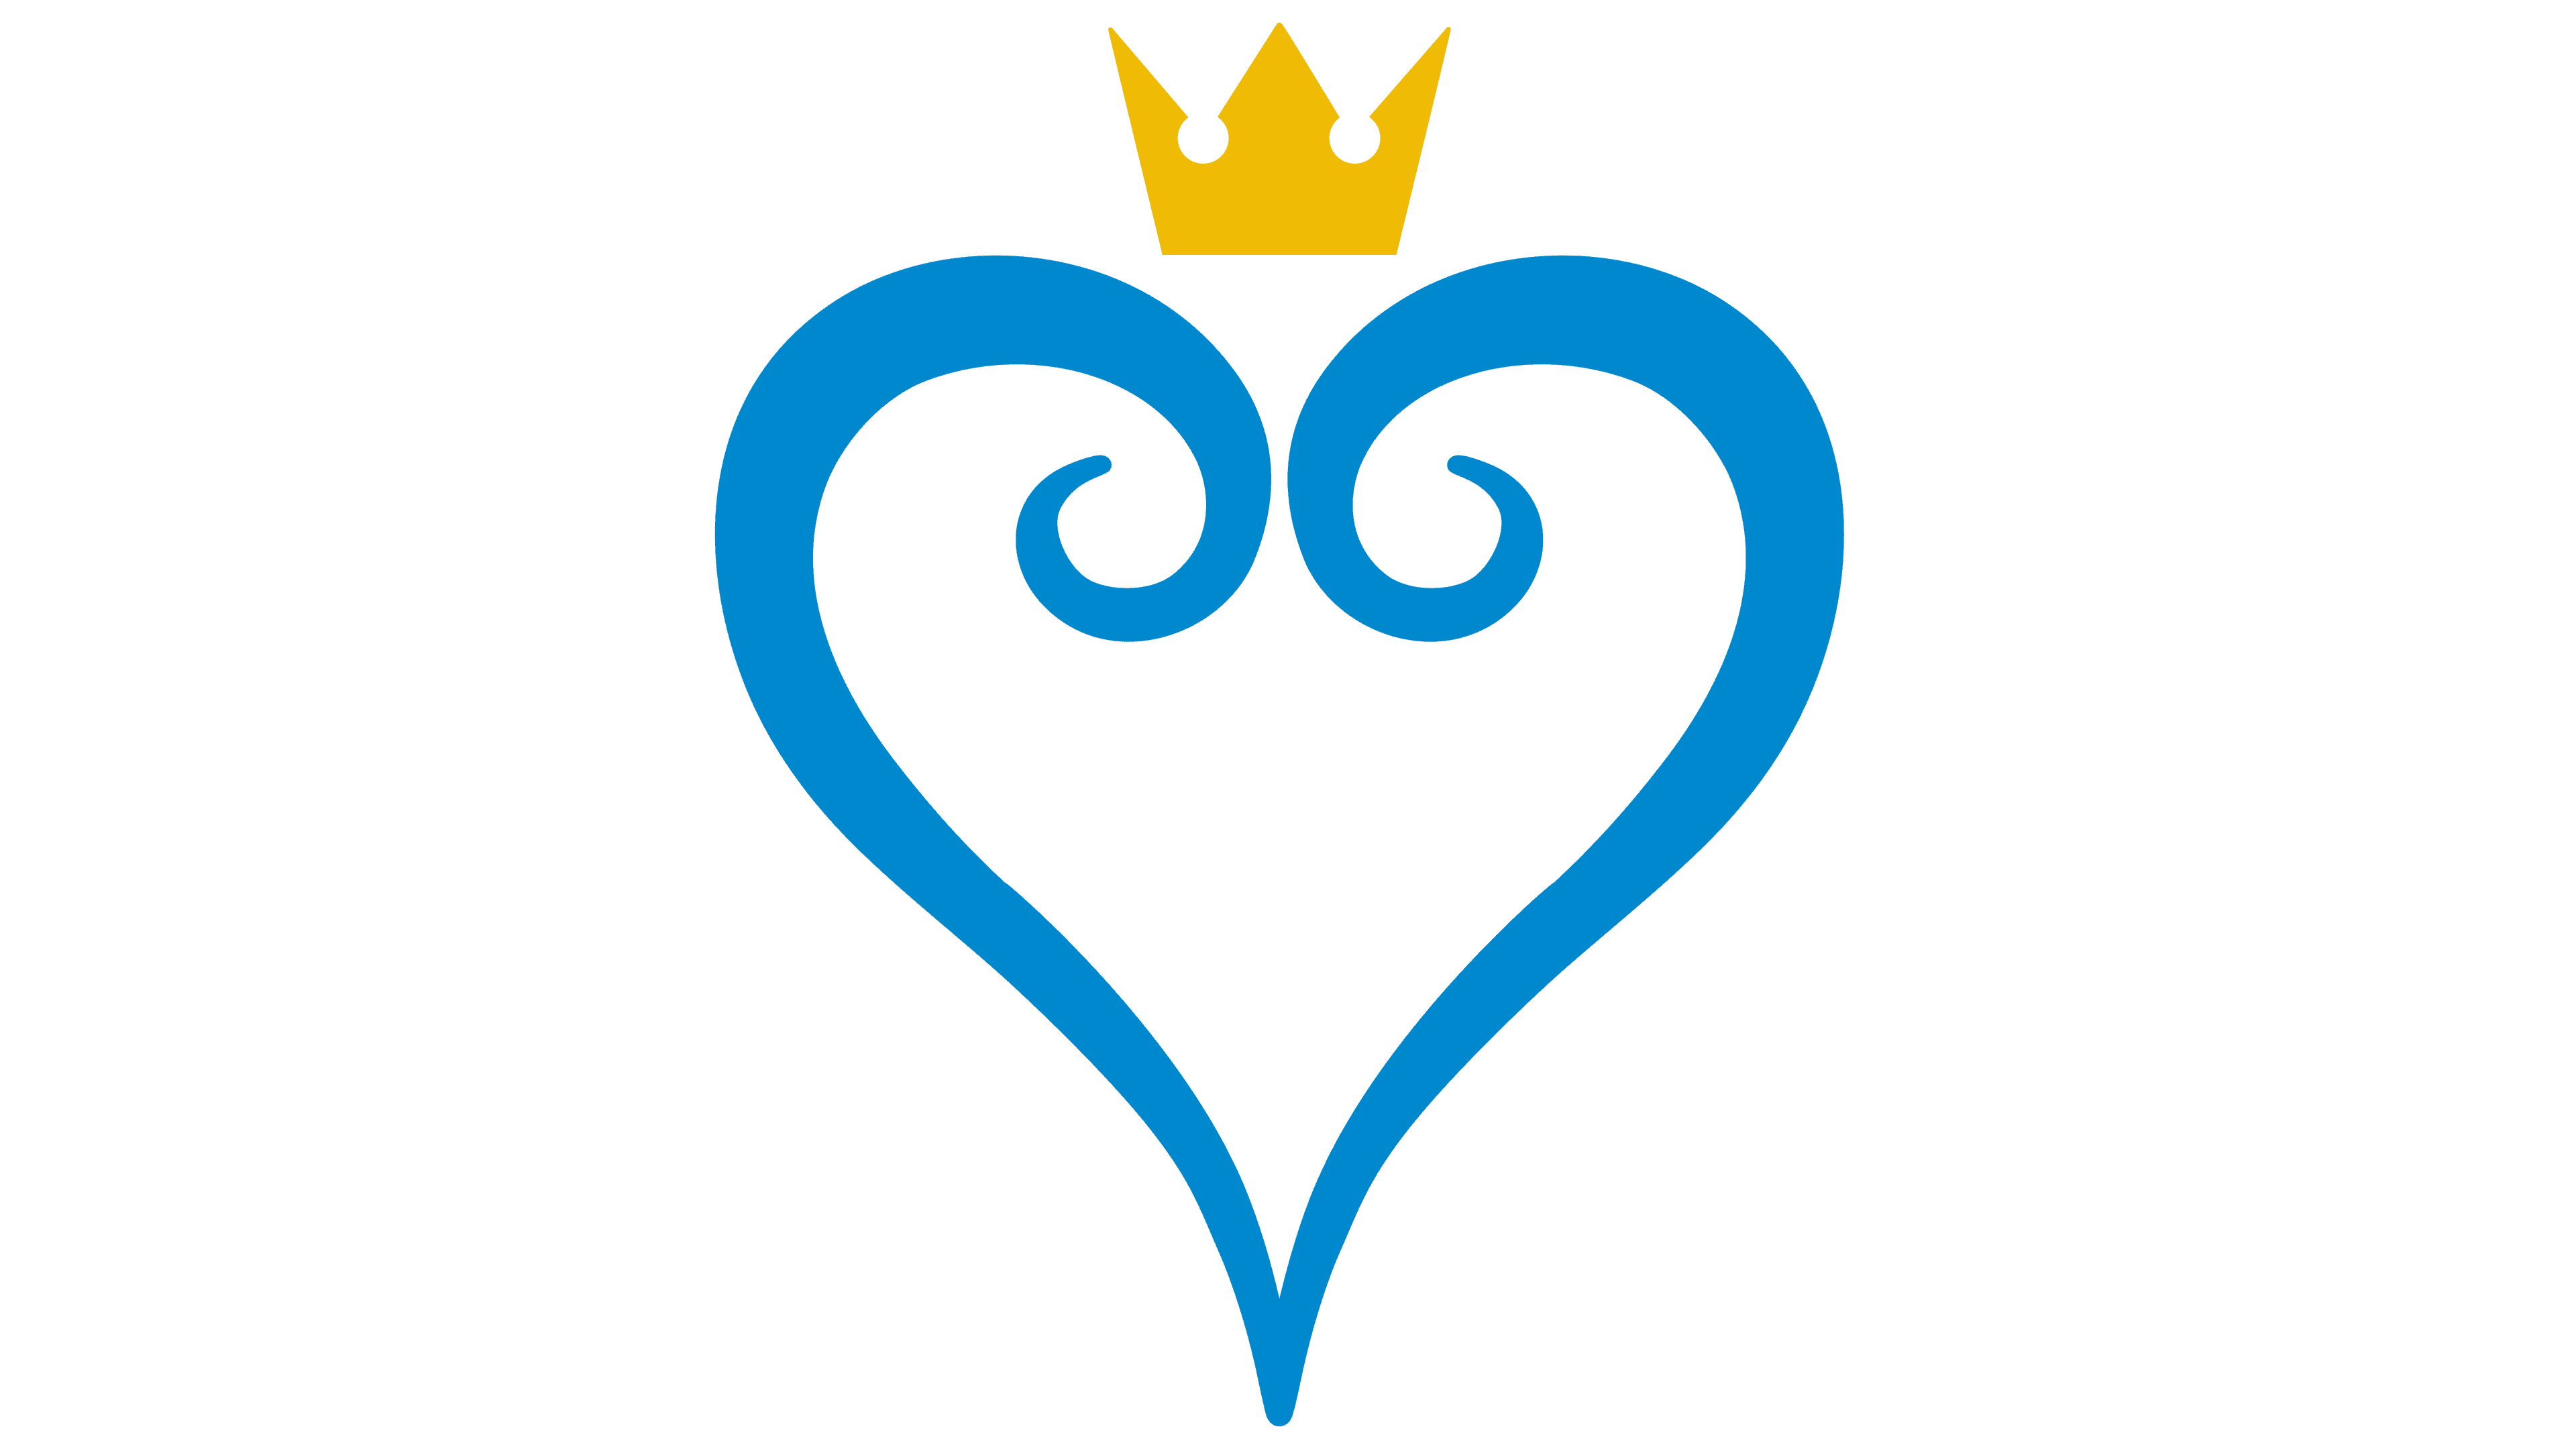 Kingdom Hearts Crown Tattoo with Heartless Symbol - wide 6